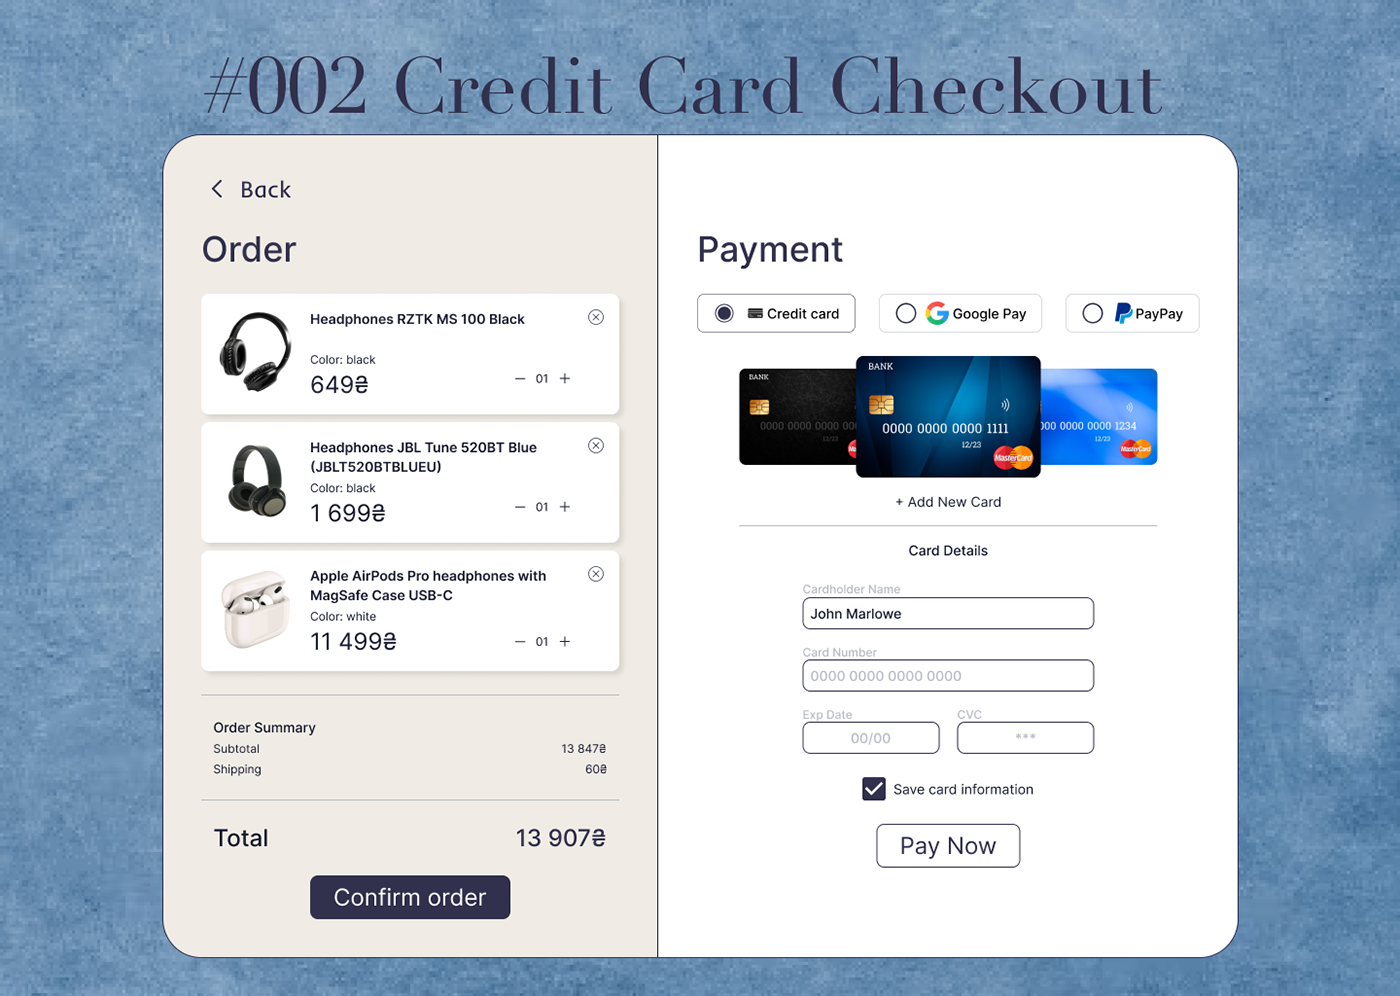 UI/UX ui design Mobile app daily ui challenge daily sign up Credit Card Checkout dashboard 404 page design